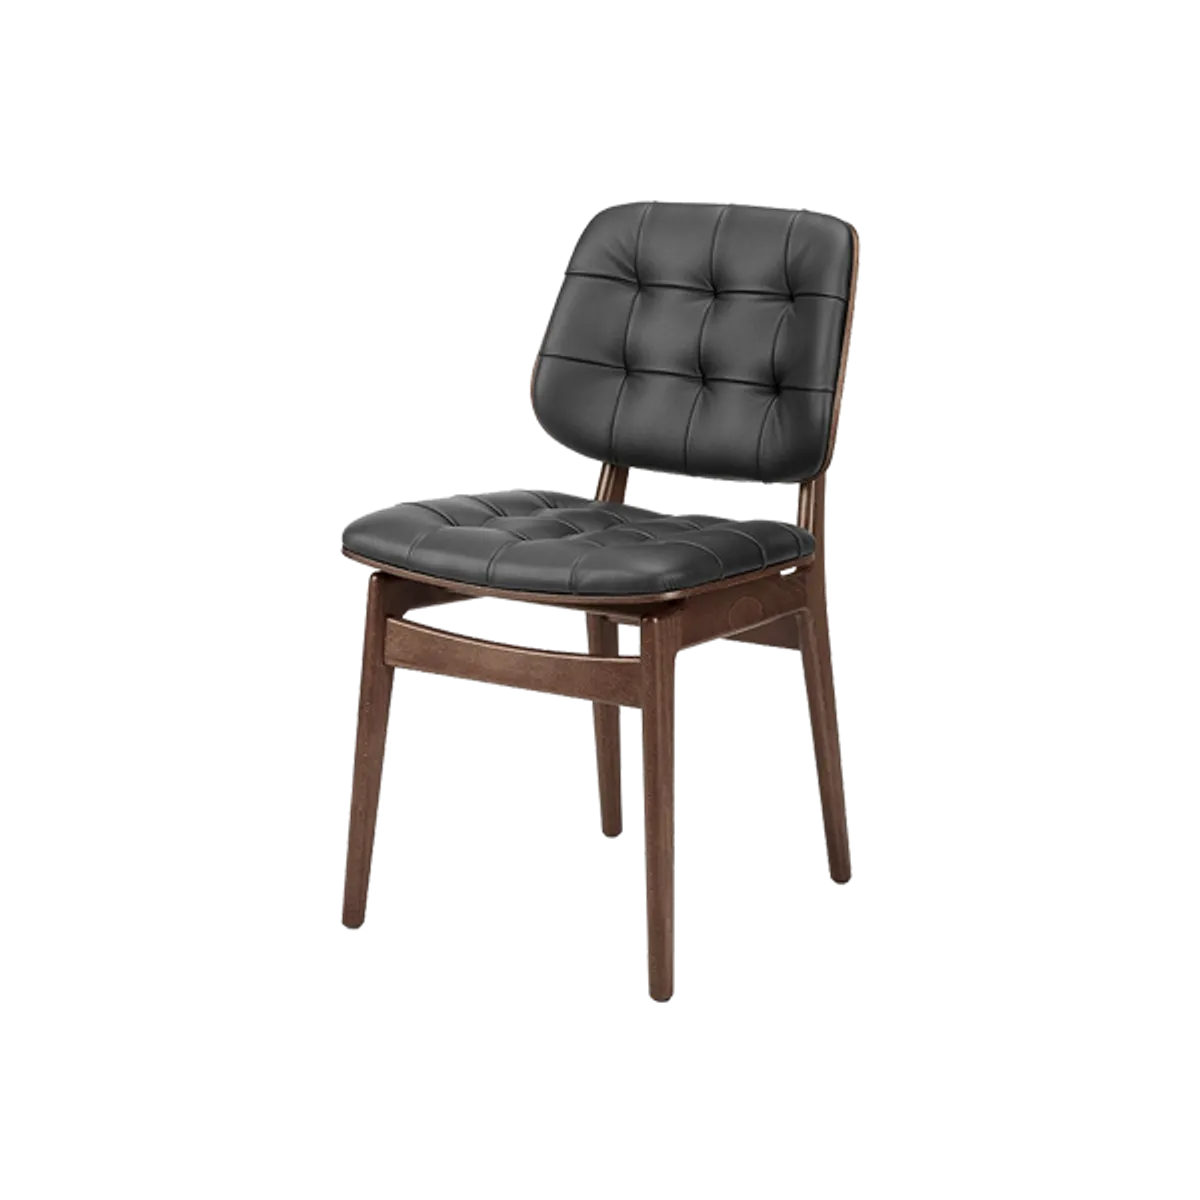 Morgansidechair Inside Out Contracts1